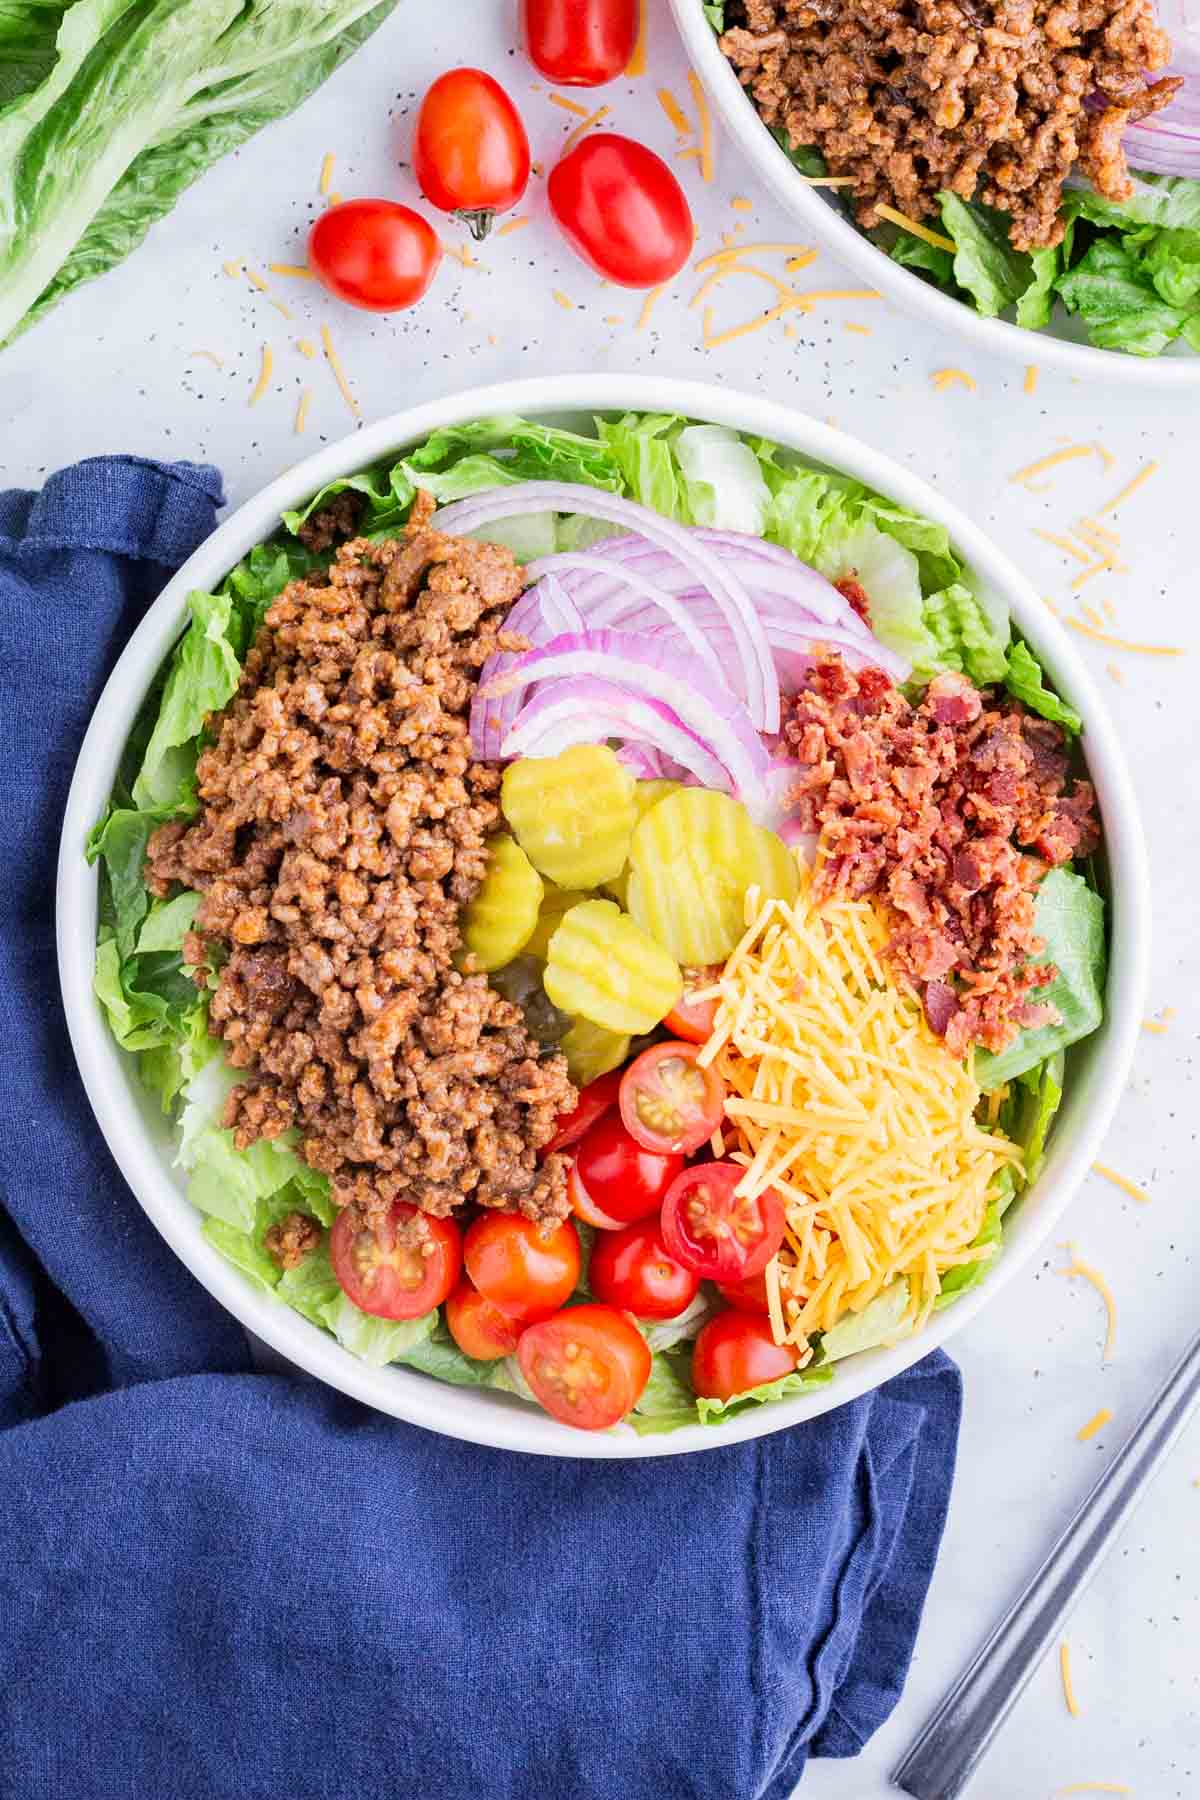 The burger bowl is built with lettuce, ground beef, and toppings.